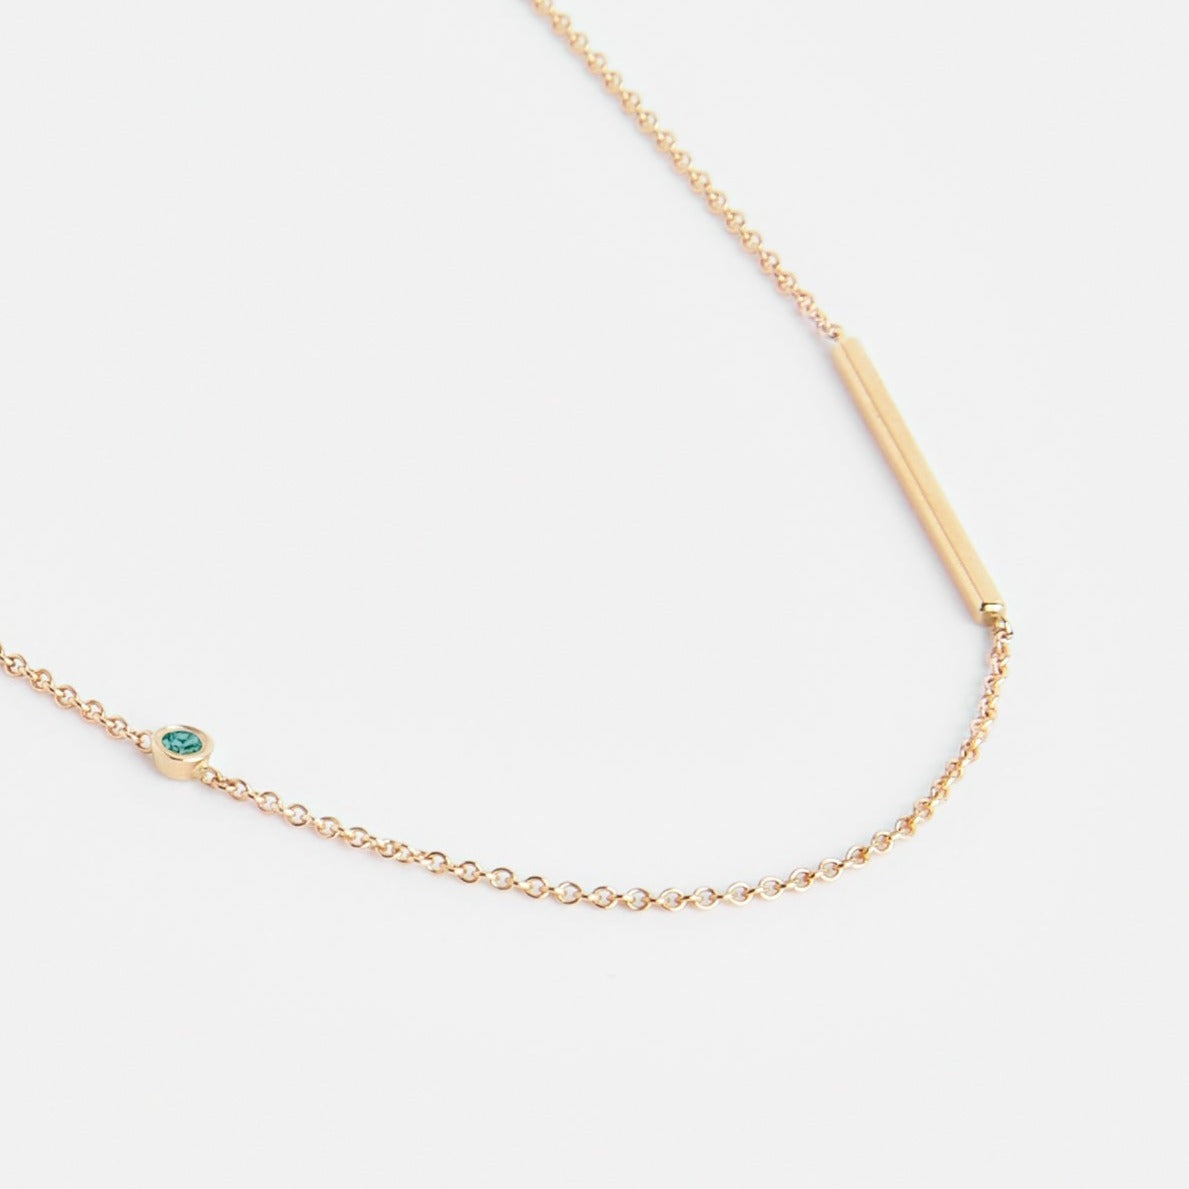 Iki Alternative Necklace in 14k Gold set with Emerald By SHW Fine Jewelry NYC